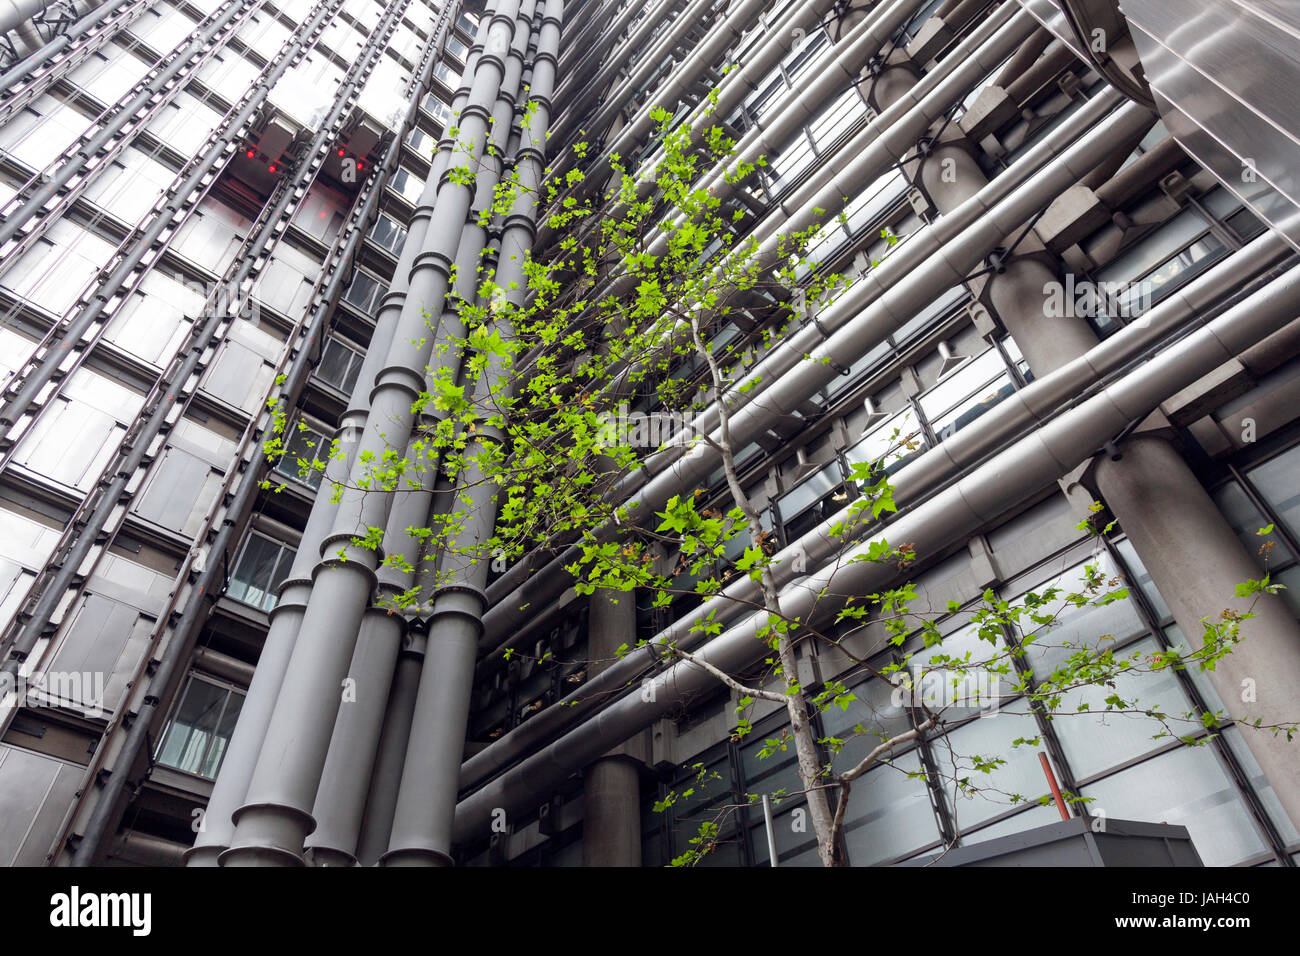 London, United Kingdom, 7 may 2017: part of lloyd's building in the city of london with green tree and elevators Stock Photo